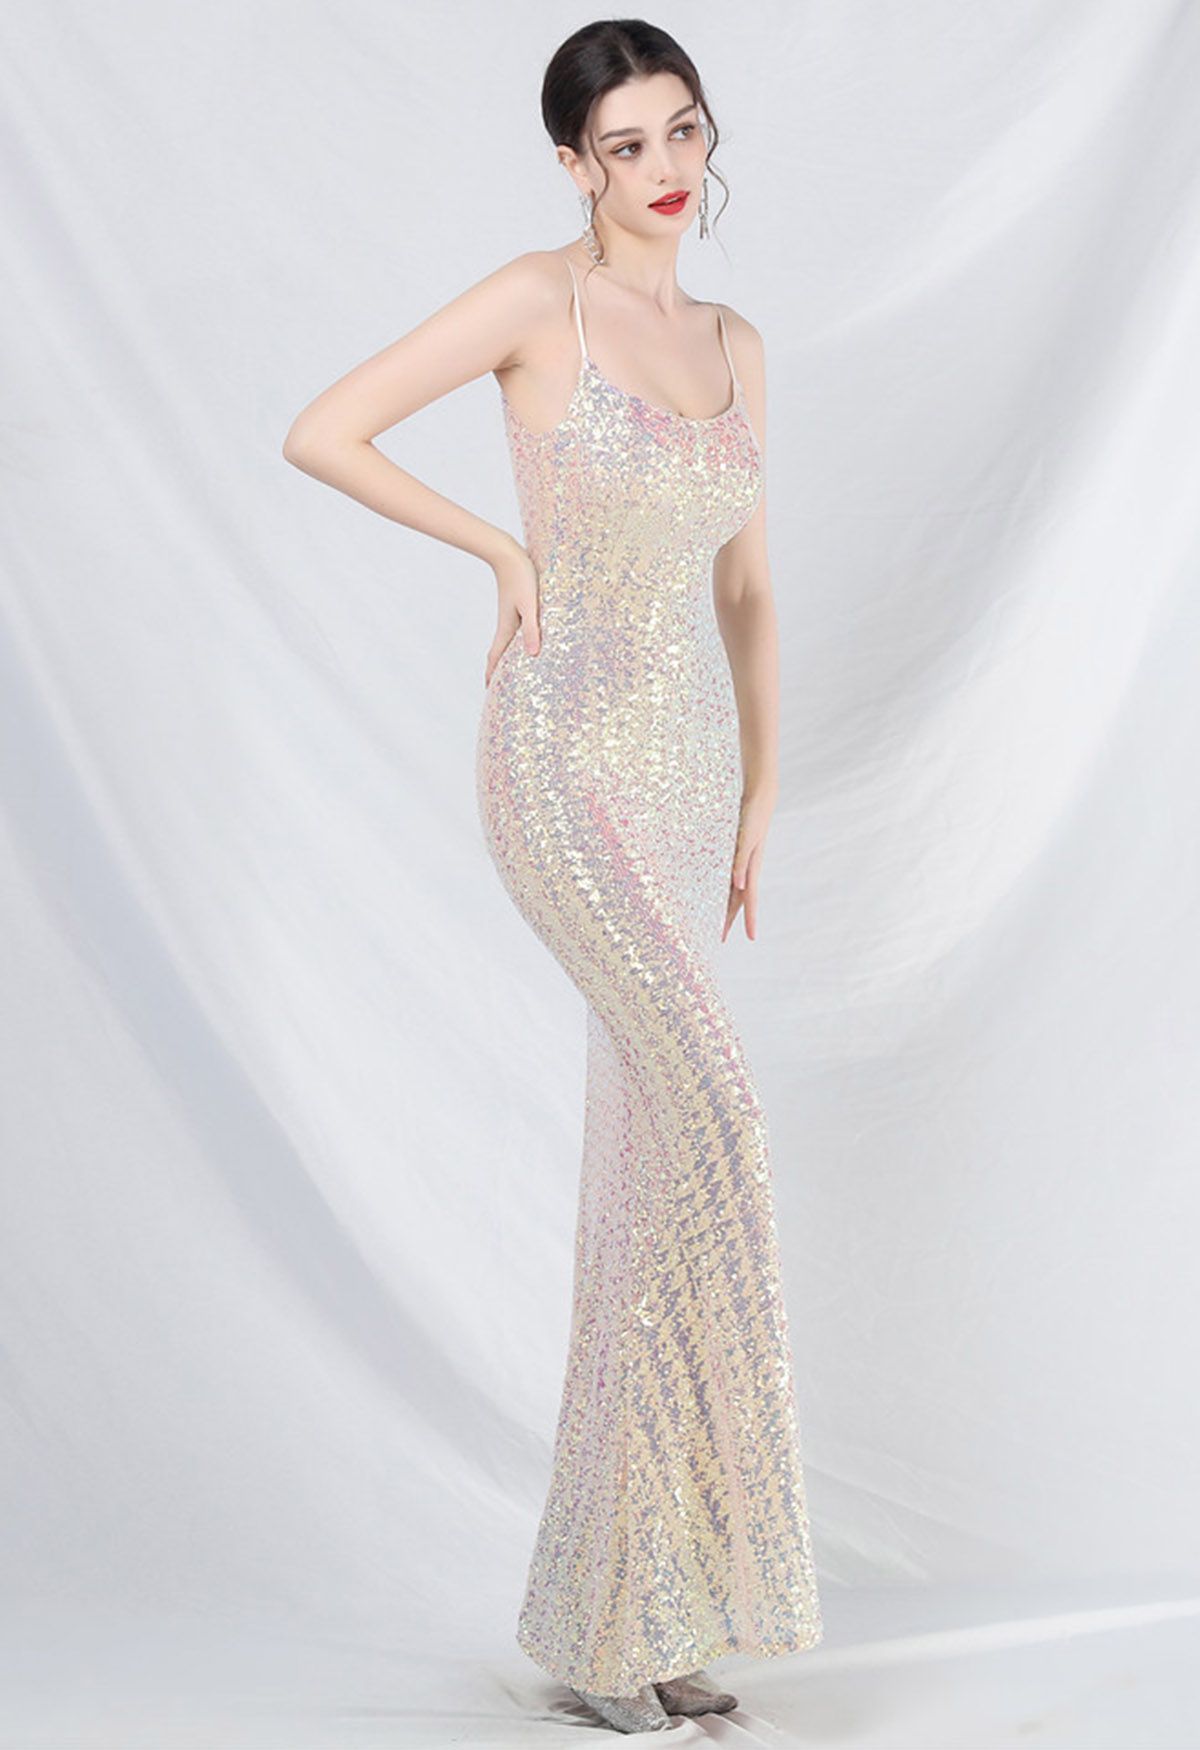 Fairytale Sequin Mermaid Cami Gown in Apricot